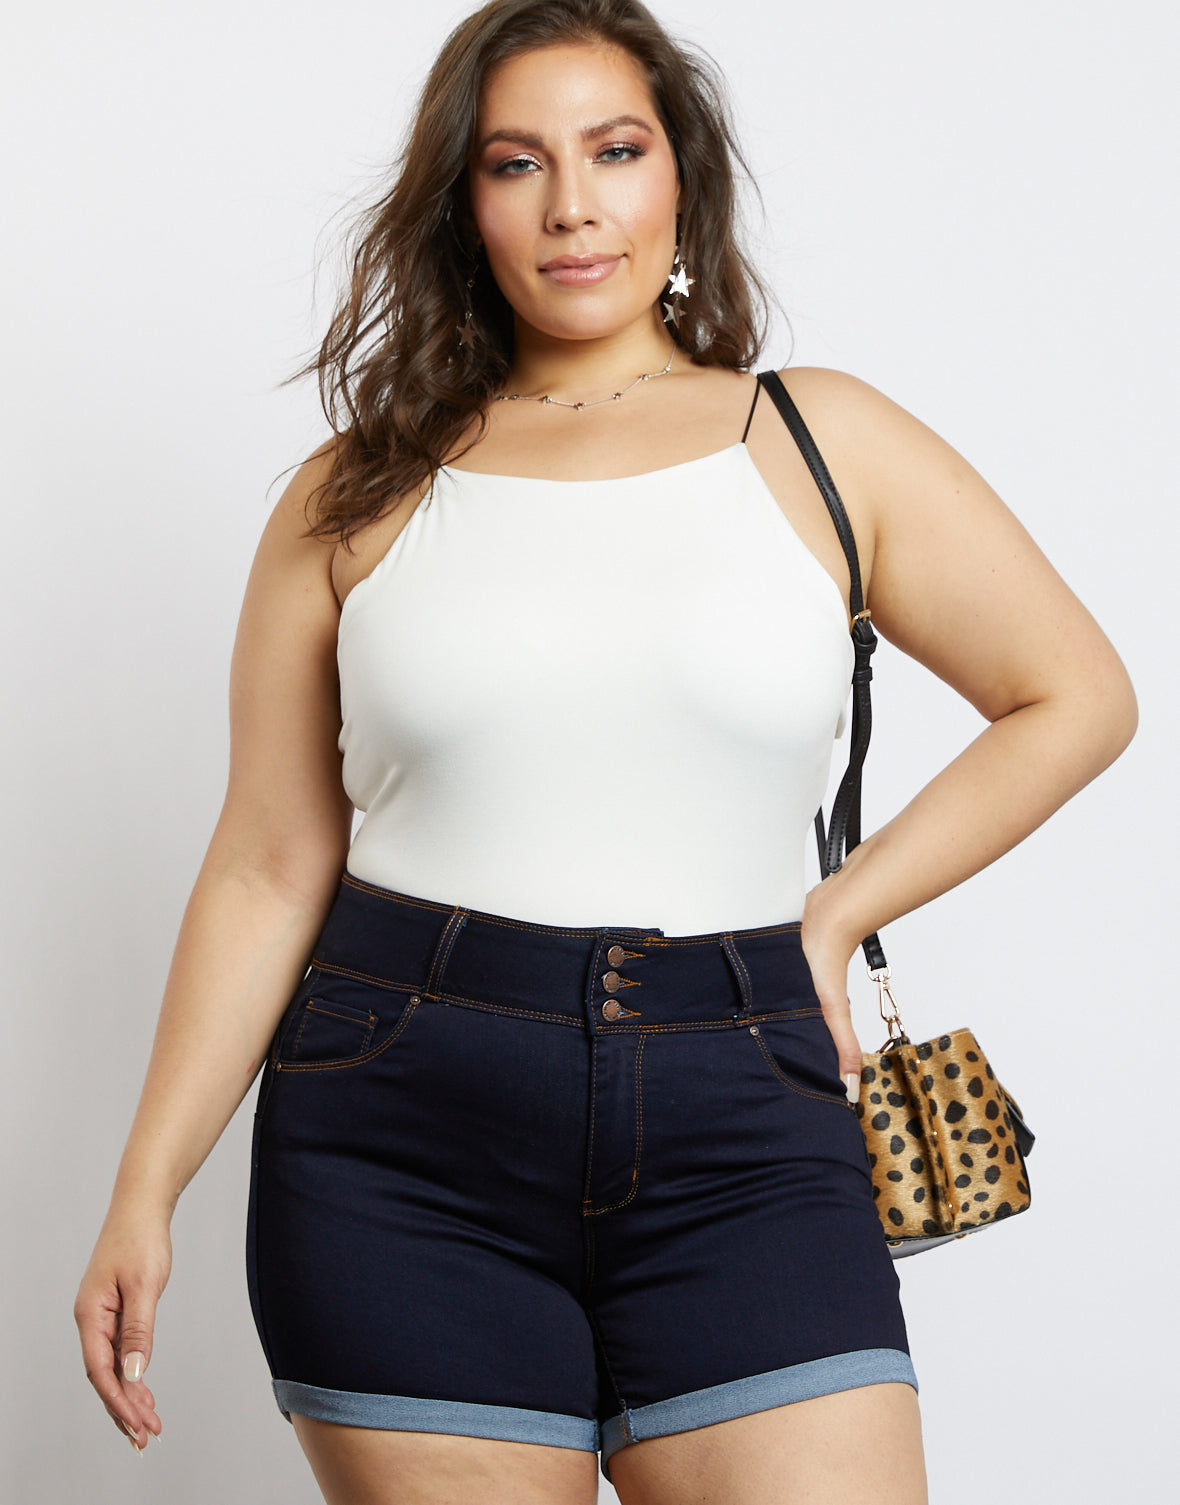 super high waisted shorts plus size